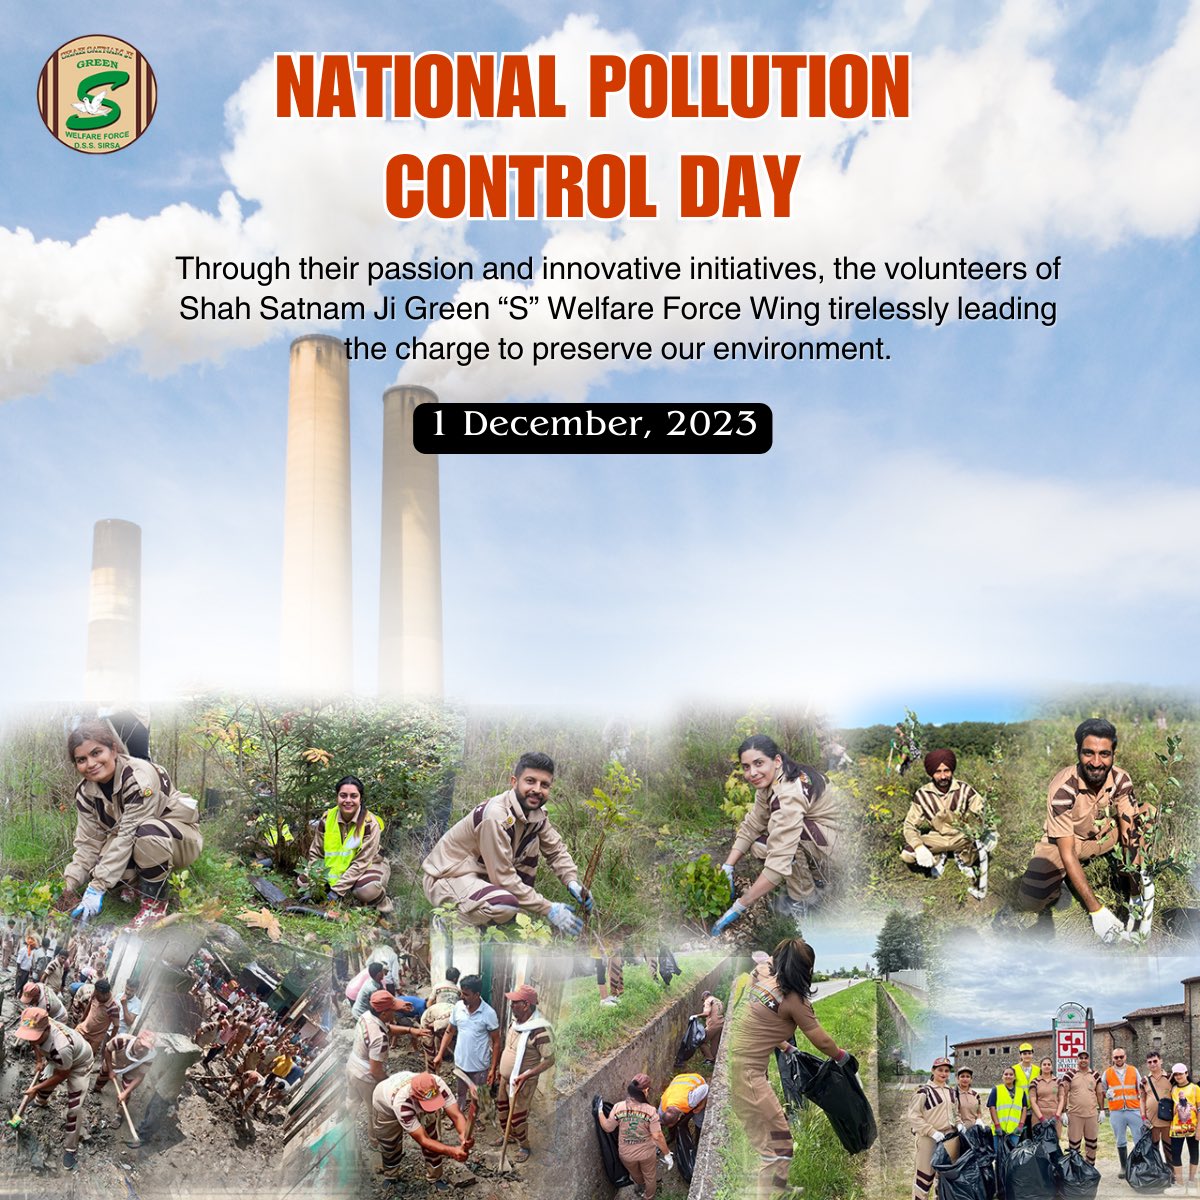 From walking & cycling short distances to keeping vehicles’ pollution in check. Reducing polythene usage to stop stubble burning. From industrial smoke control to planting trees. Let's take every measure to control pollution & keep our air clean. #NationalPollutionControlDay